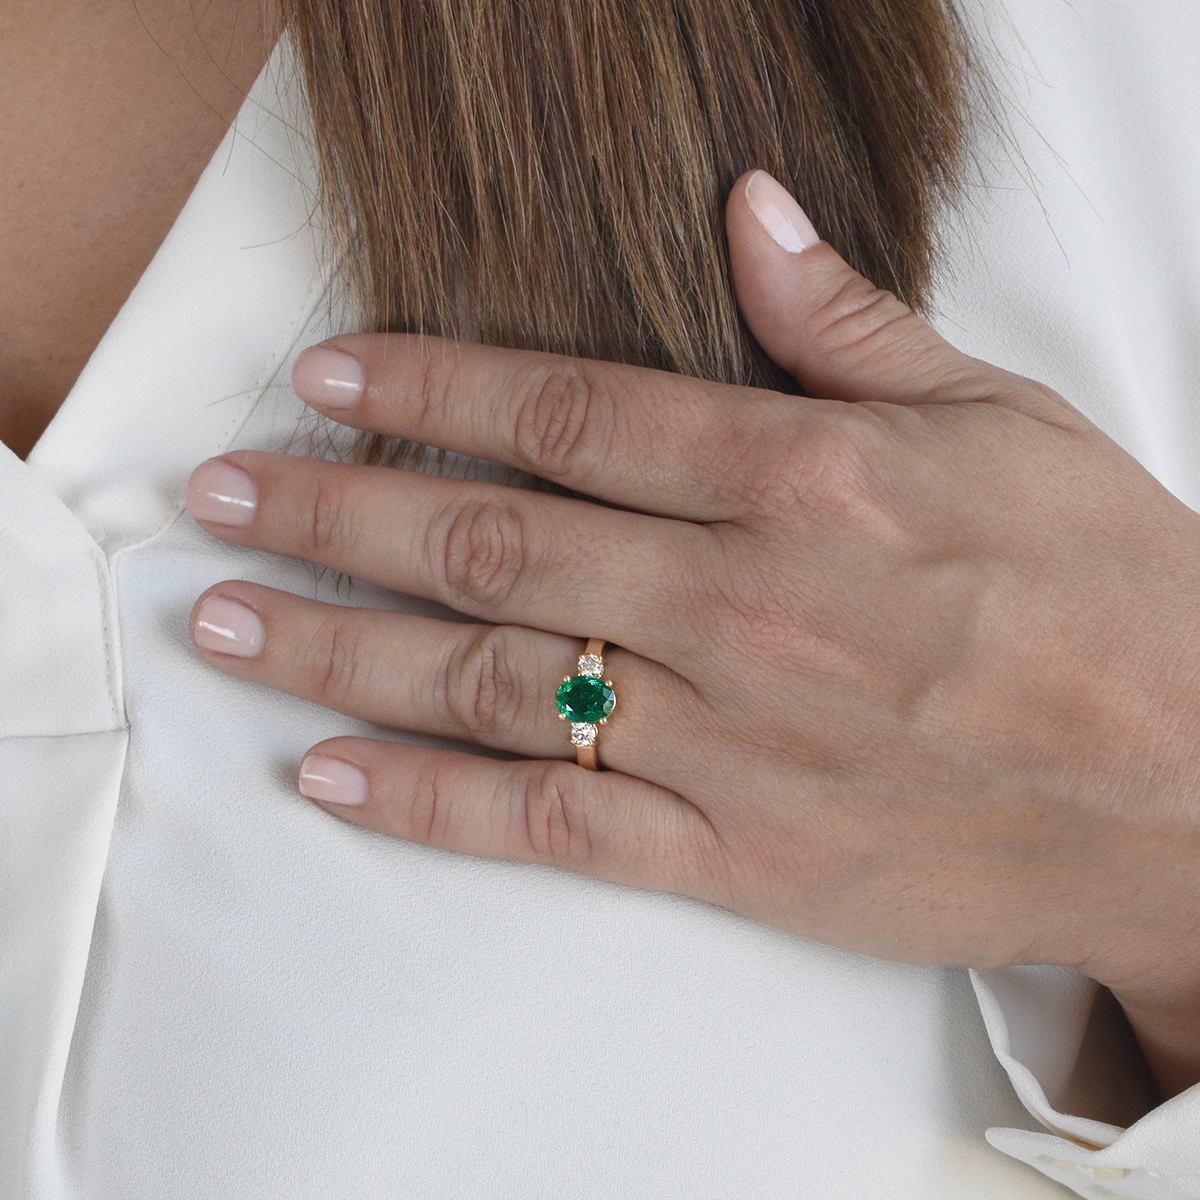 This diamond and emerald ring is ideal for an engagement or anniversary ring, representing a lasting commitment and the journey of love